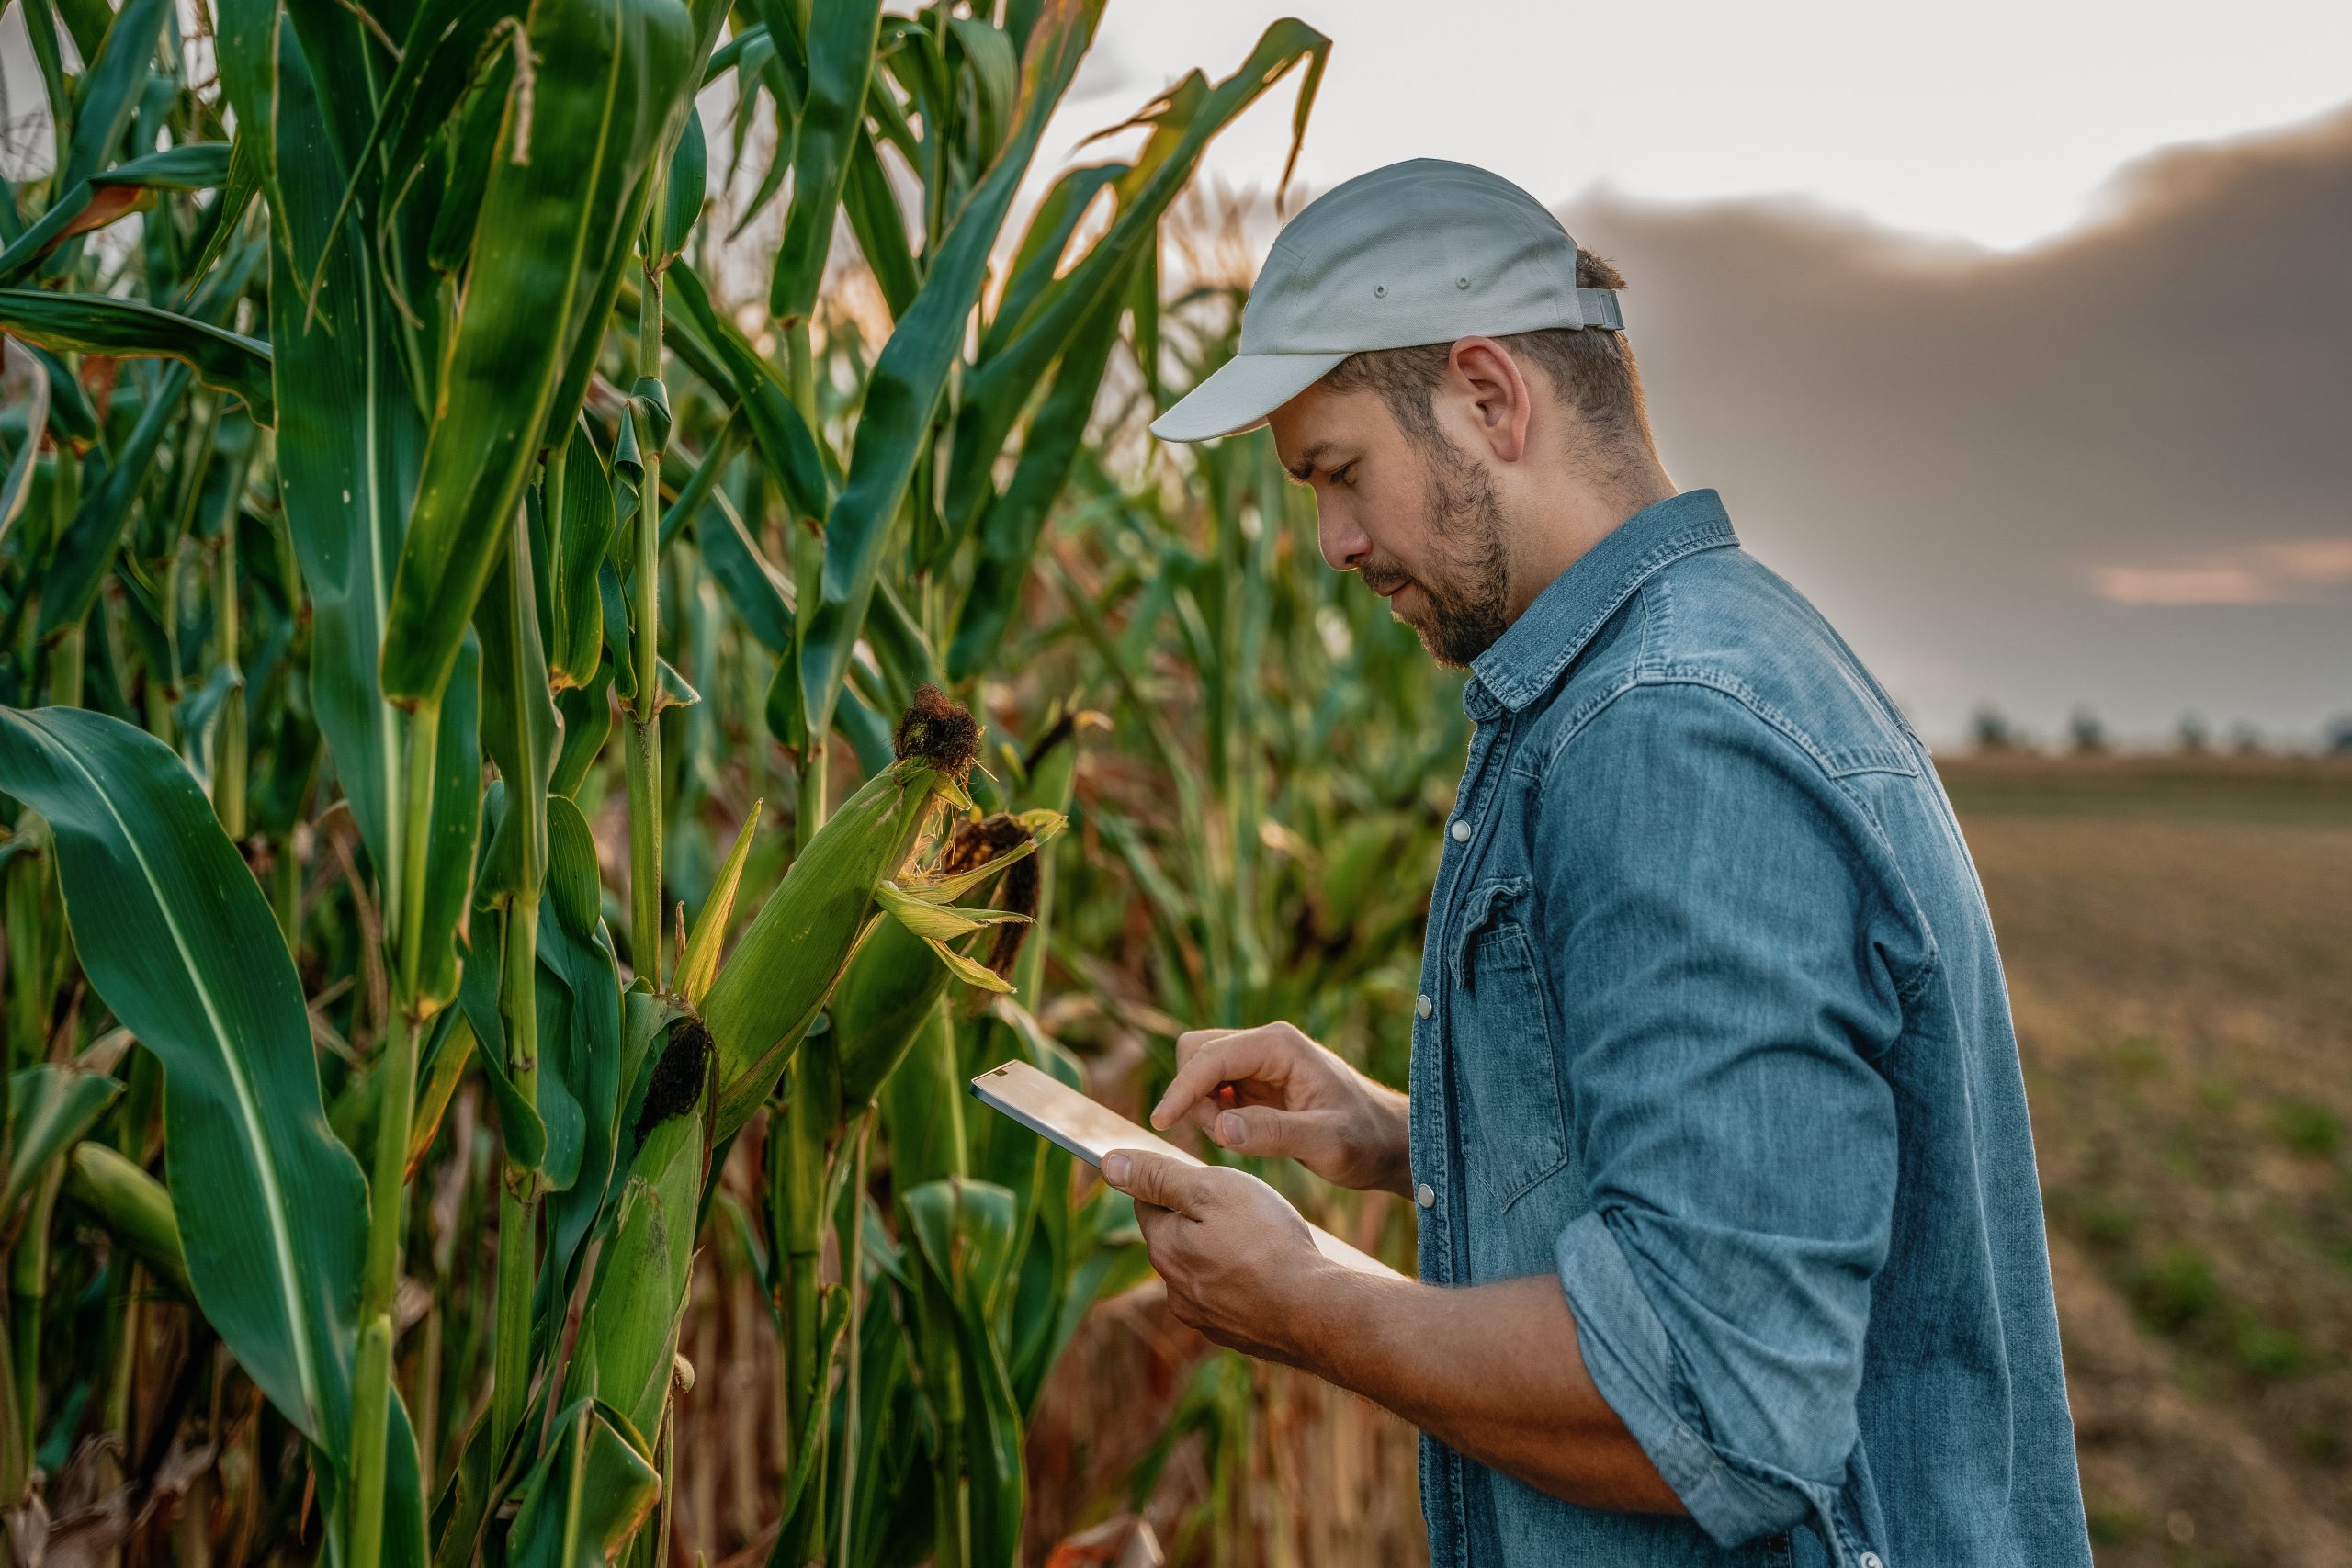 Tropic Announces Collaboration with Corteva Agriscience Utilizing Tropic’s Groundbreaking GEiGS® Technology to Develop Robust Disease Resistance Traits in Corn and Soybean